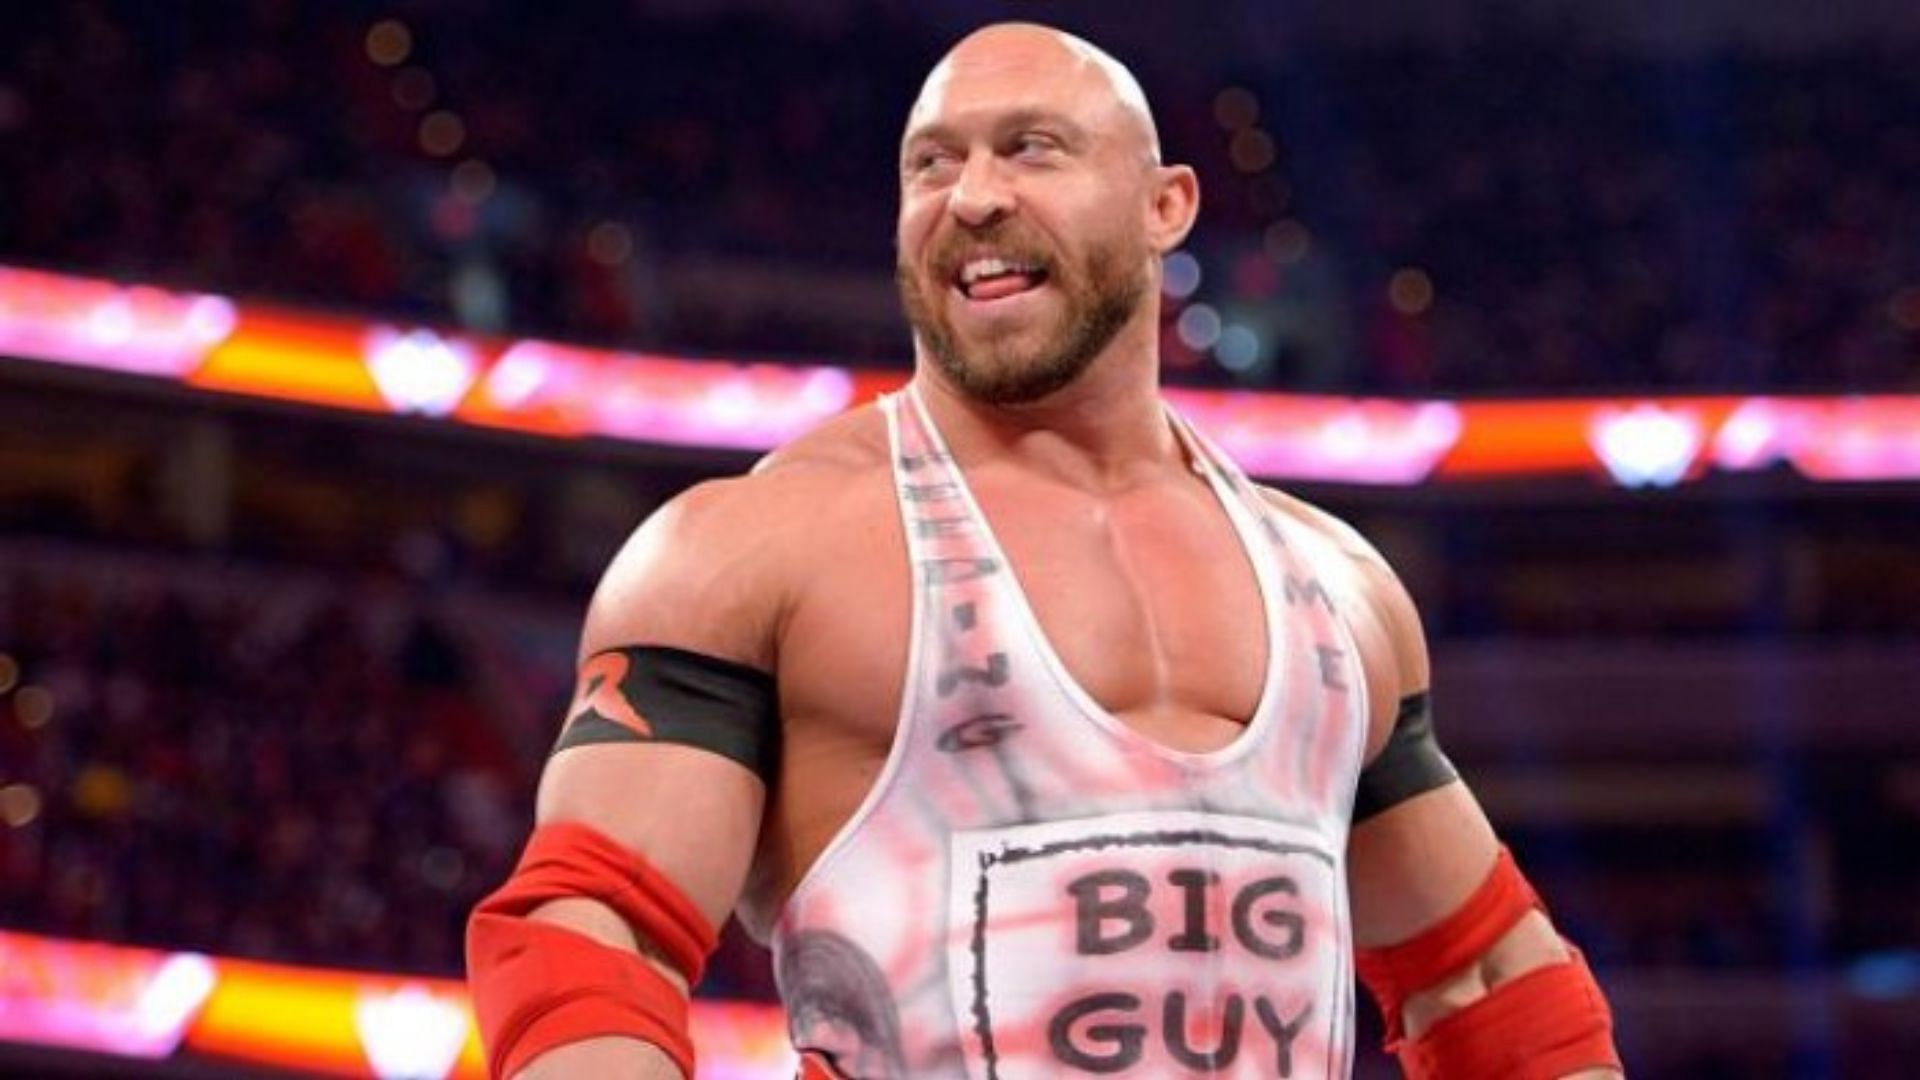 Ryback left WWE in 2016 after rejecting a new contract